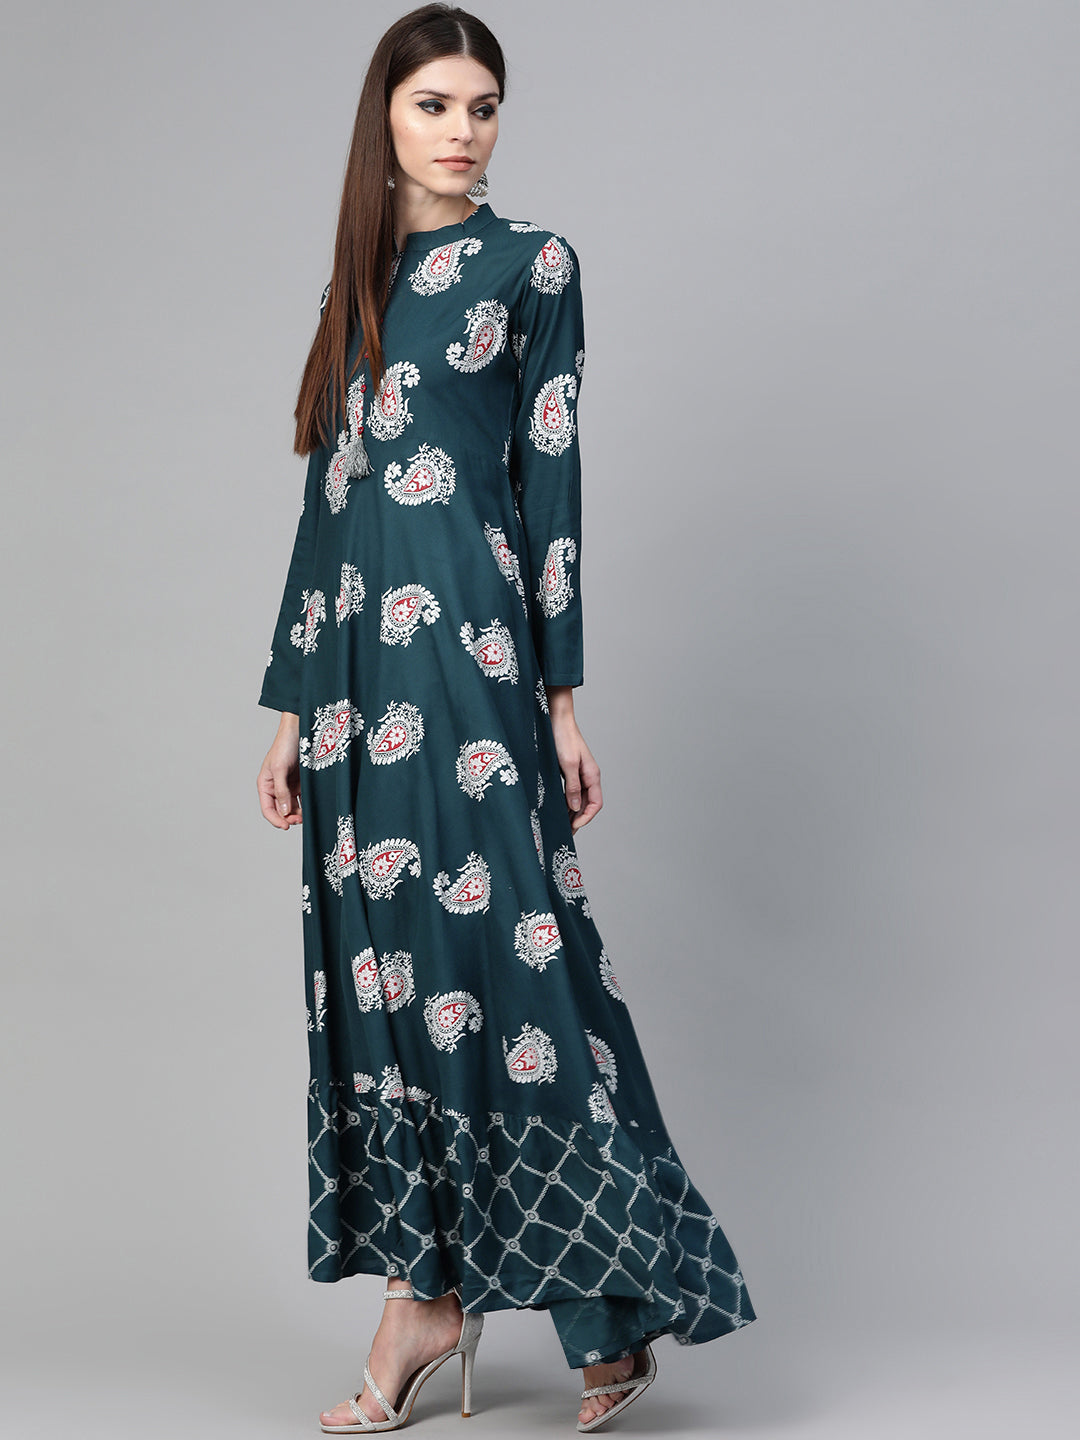 Blue & White Floral Printed Flared Maxi